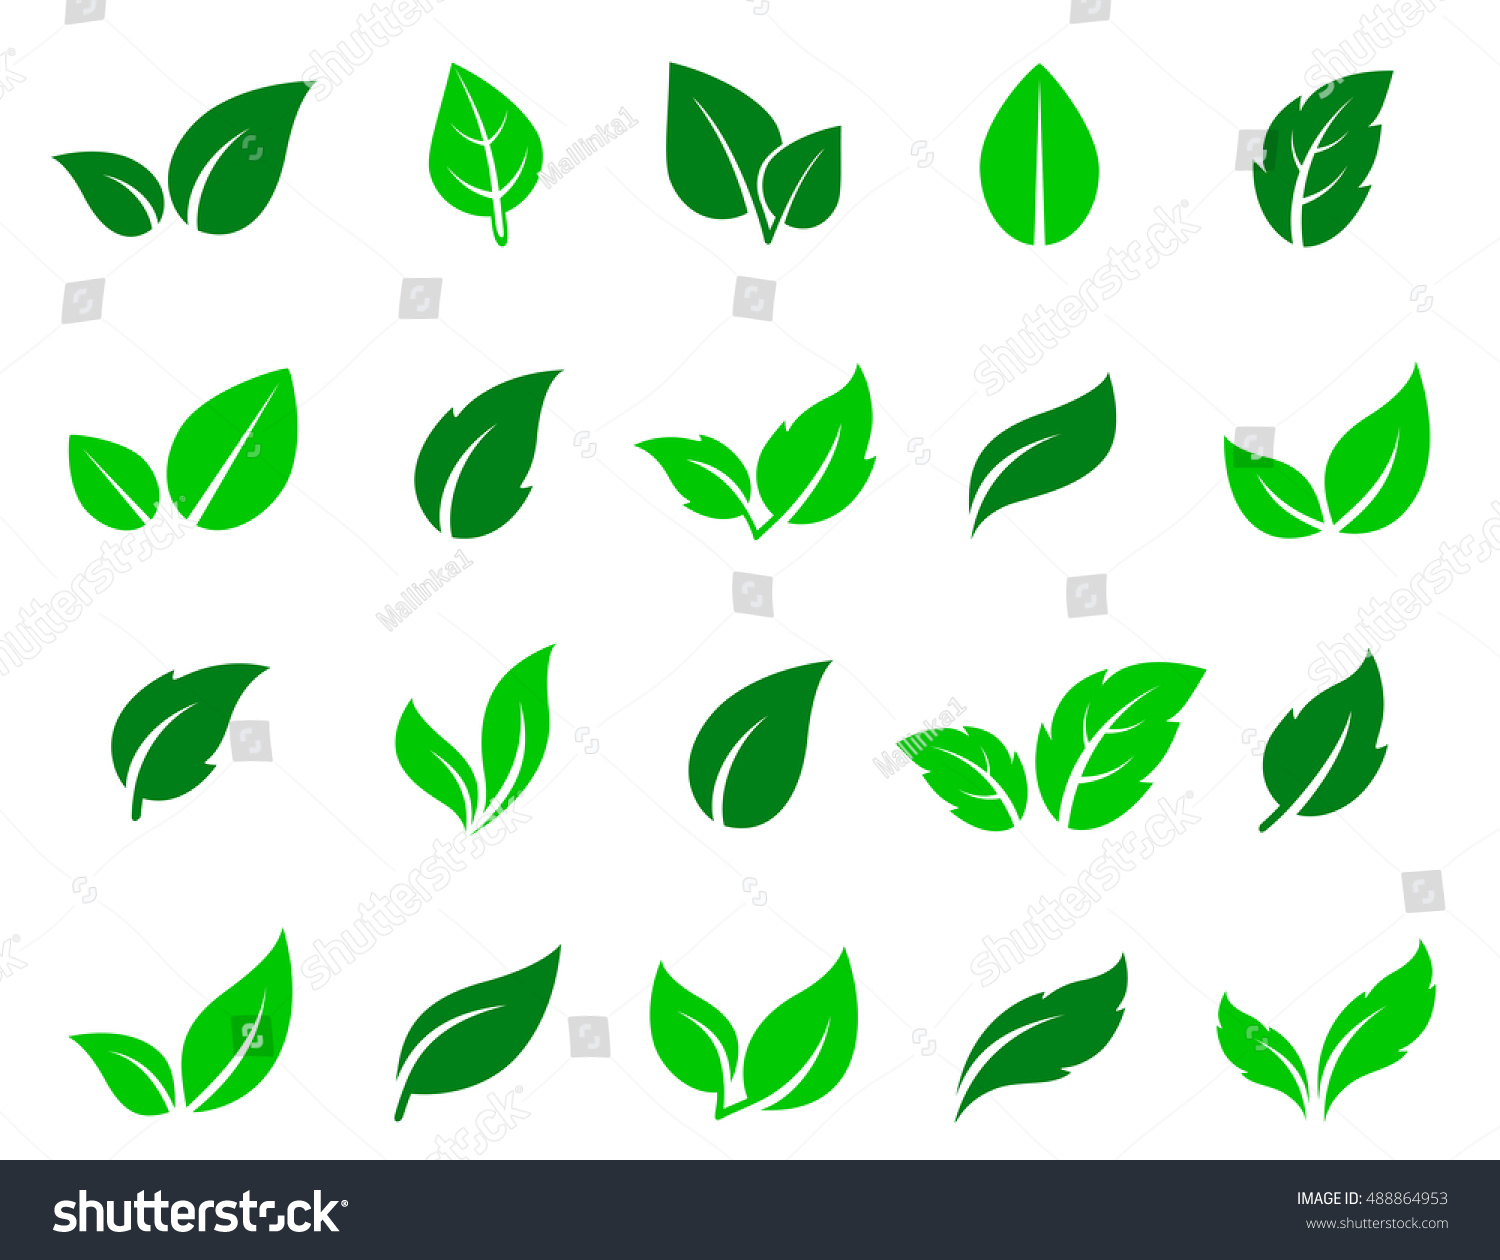 SVG of Green abstract leaf icons natural set on white background. Vector illustration. svg